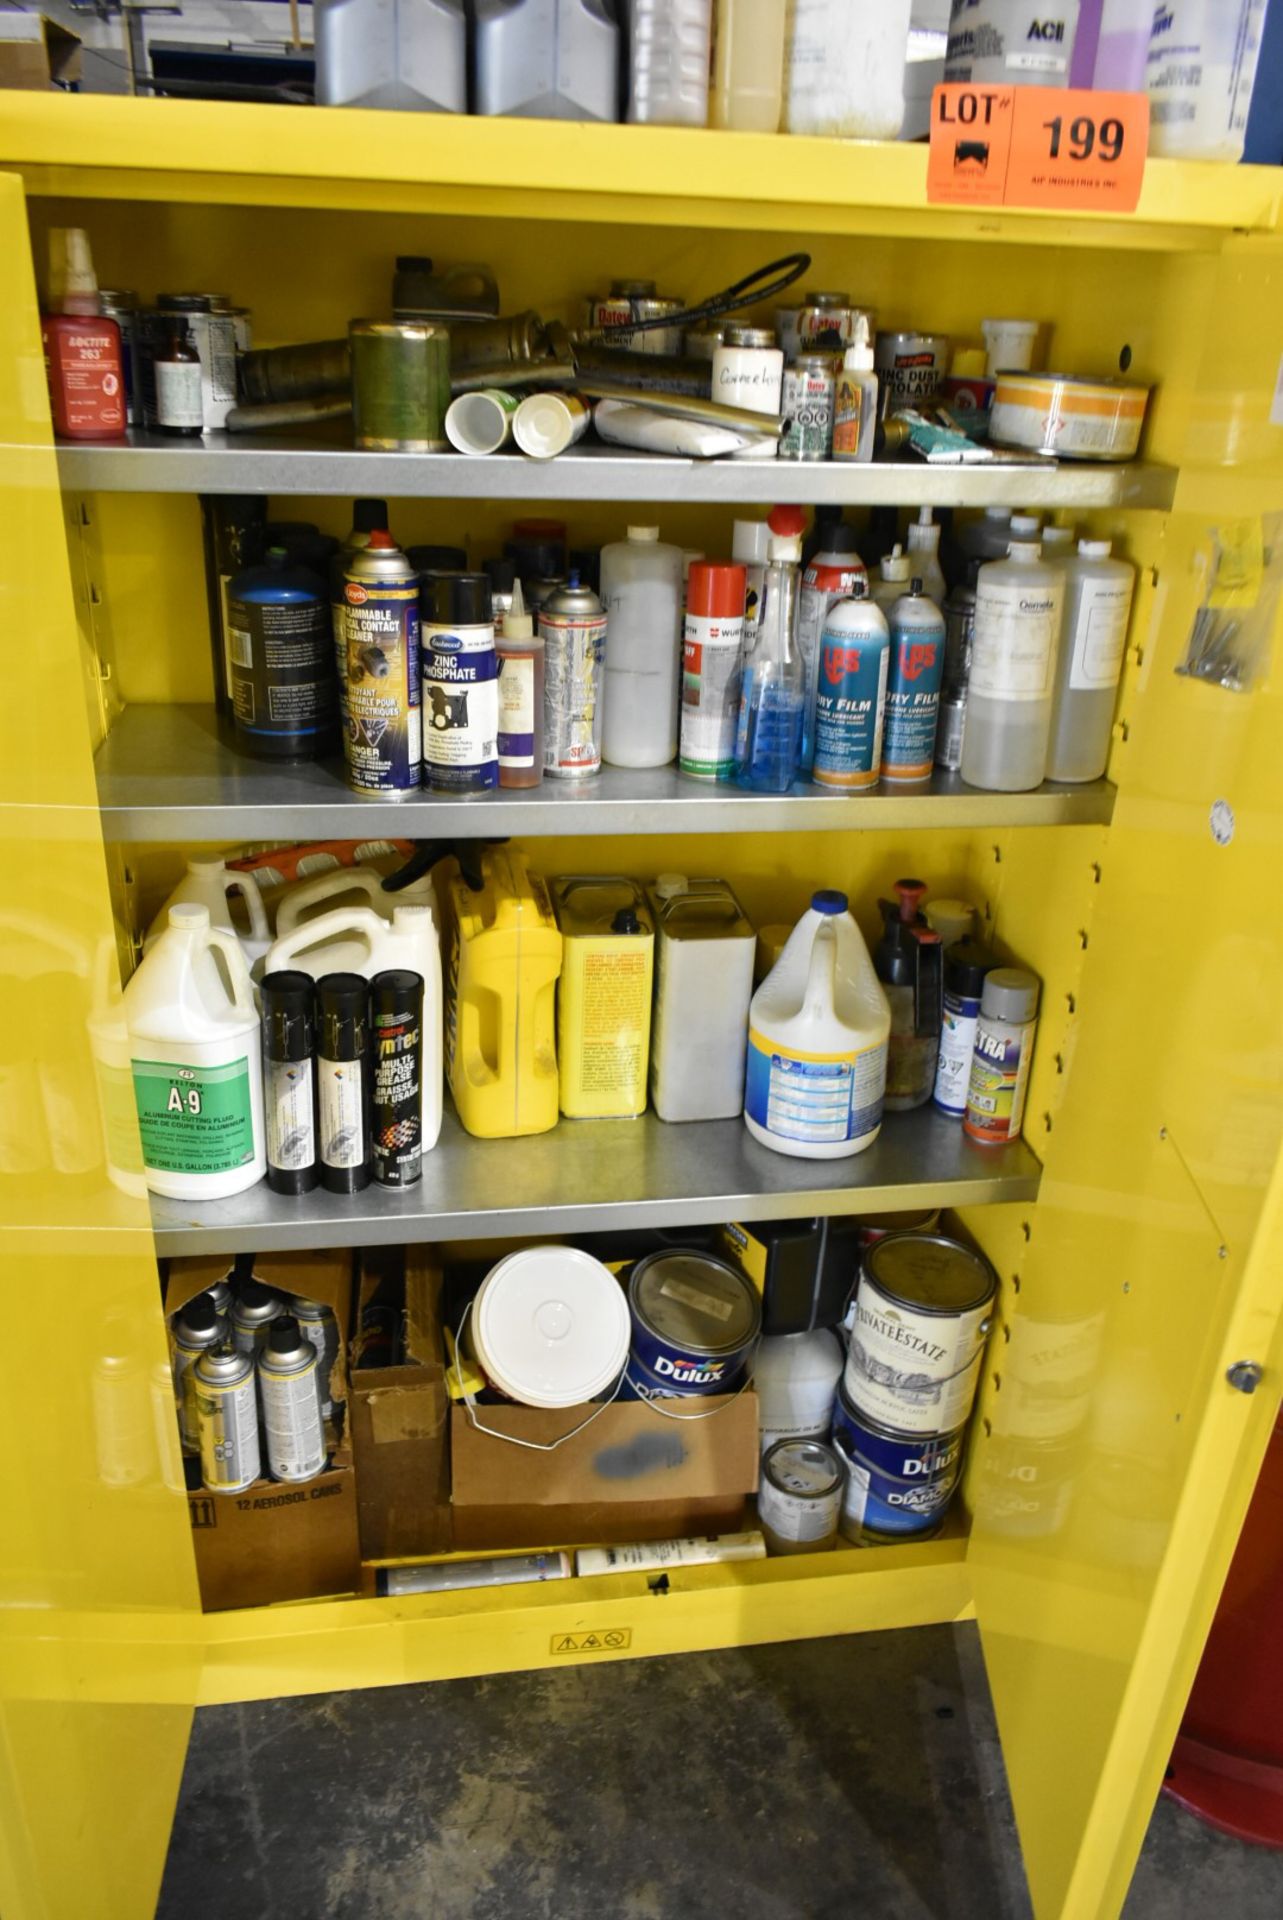 LOT/ FIREPROOF CABINET WITH CONTENTS - Image 2 of 2